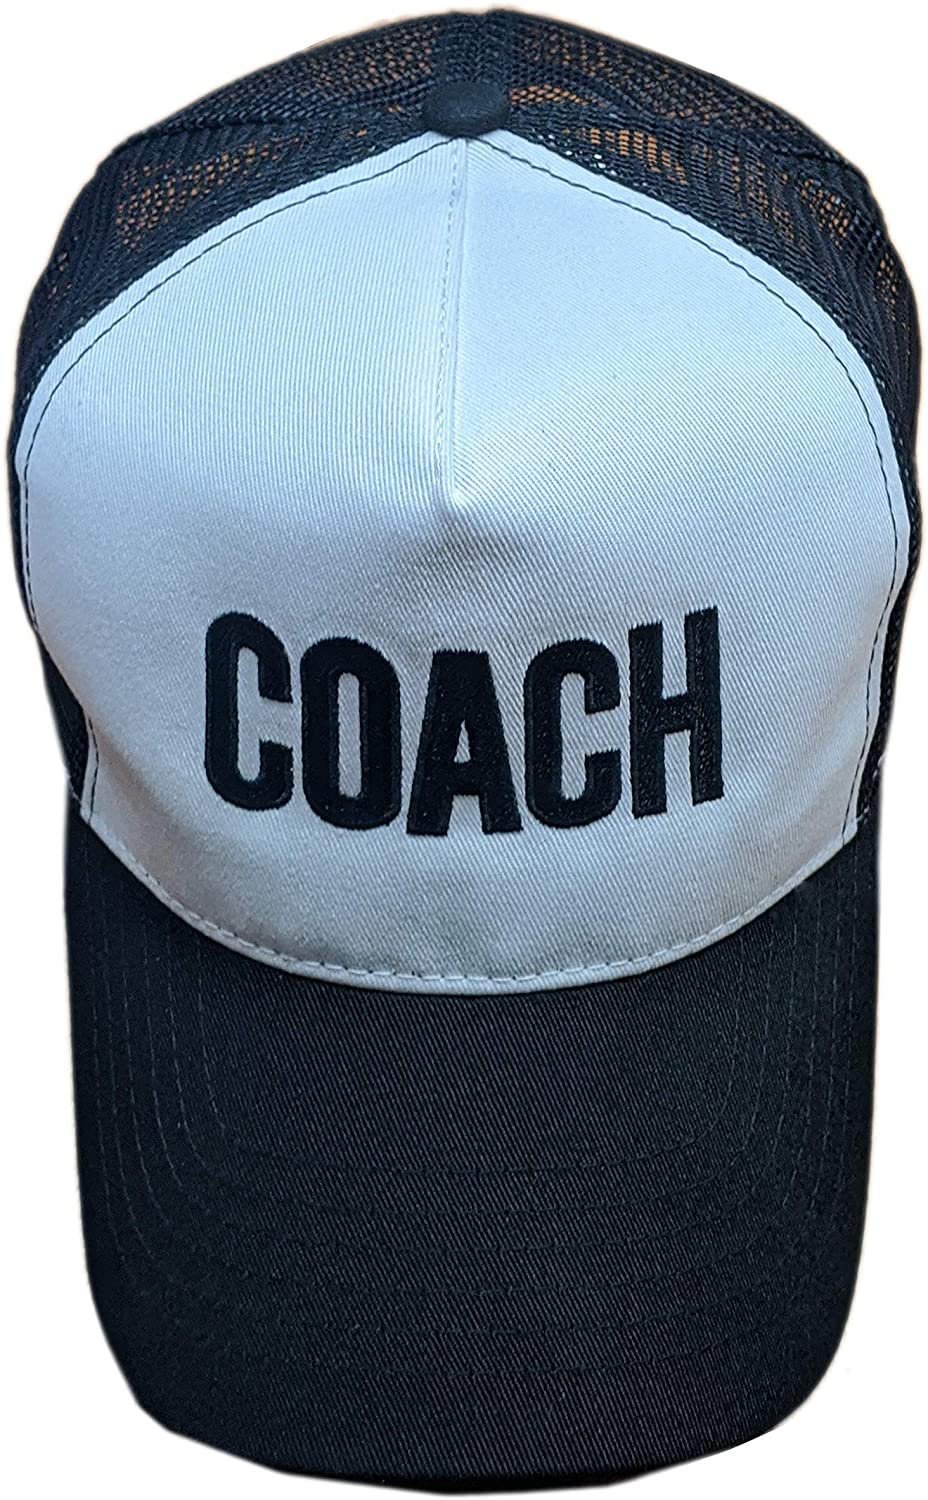 Coach Baseball Hat Embroidered USA Recycled Cotton Mesh Trucker Cap